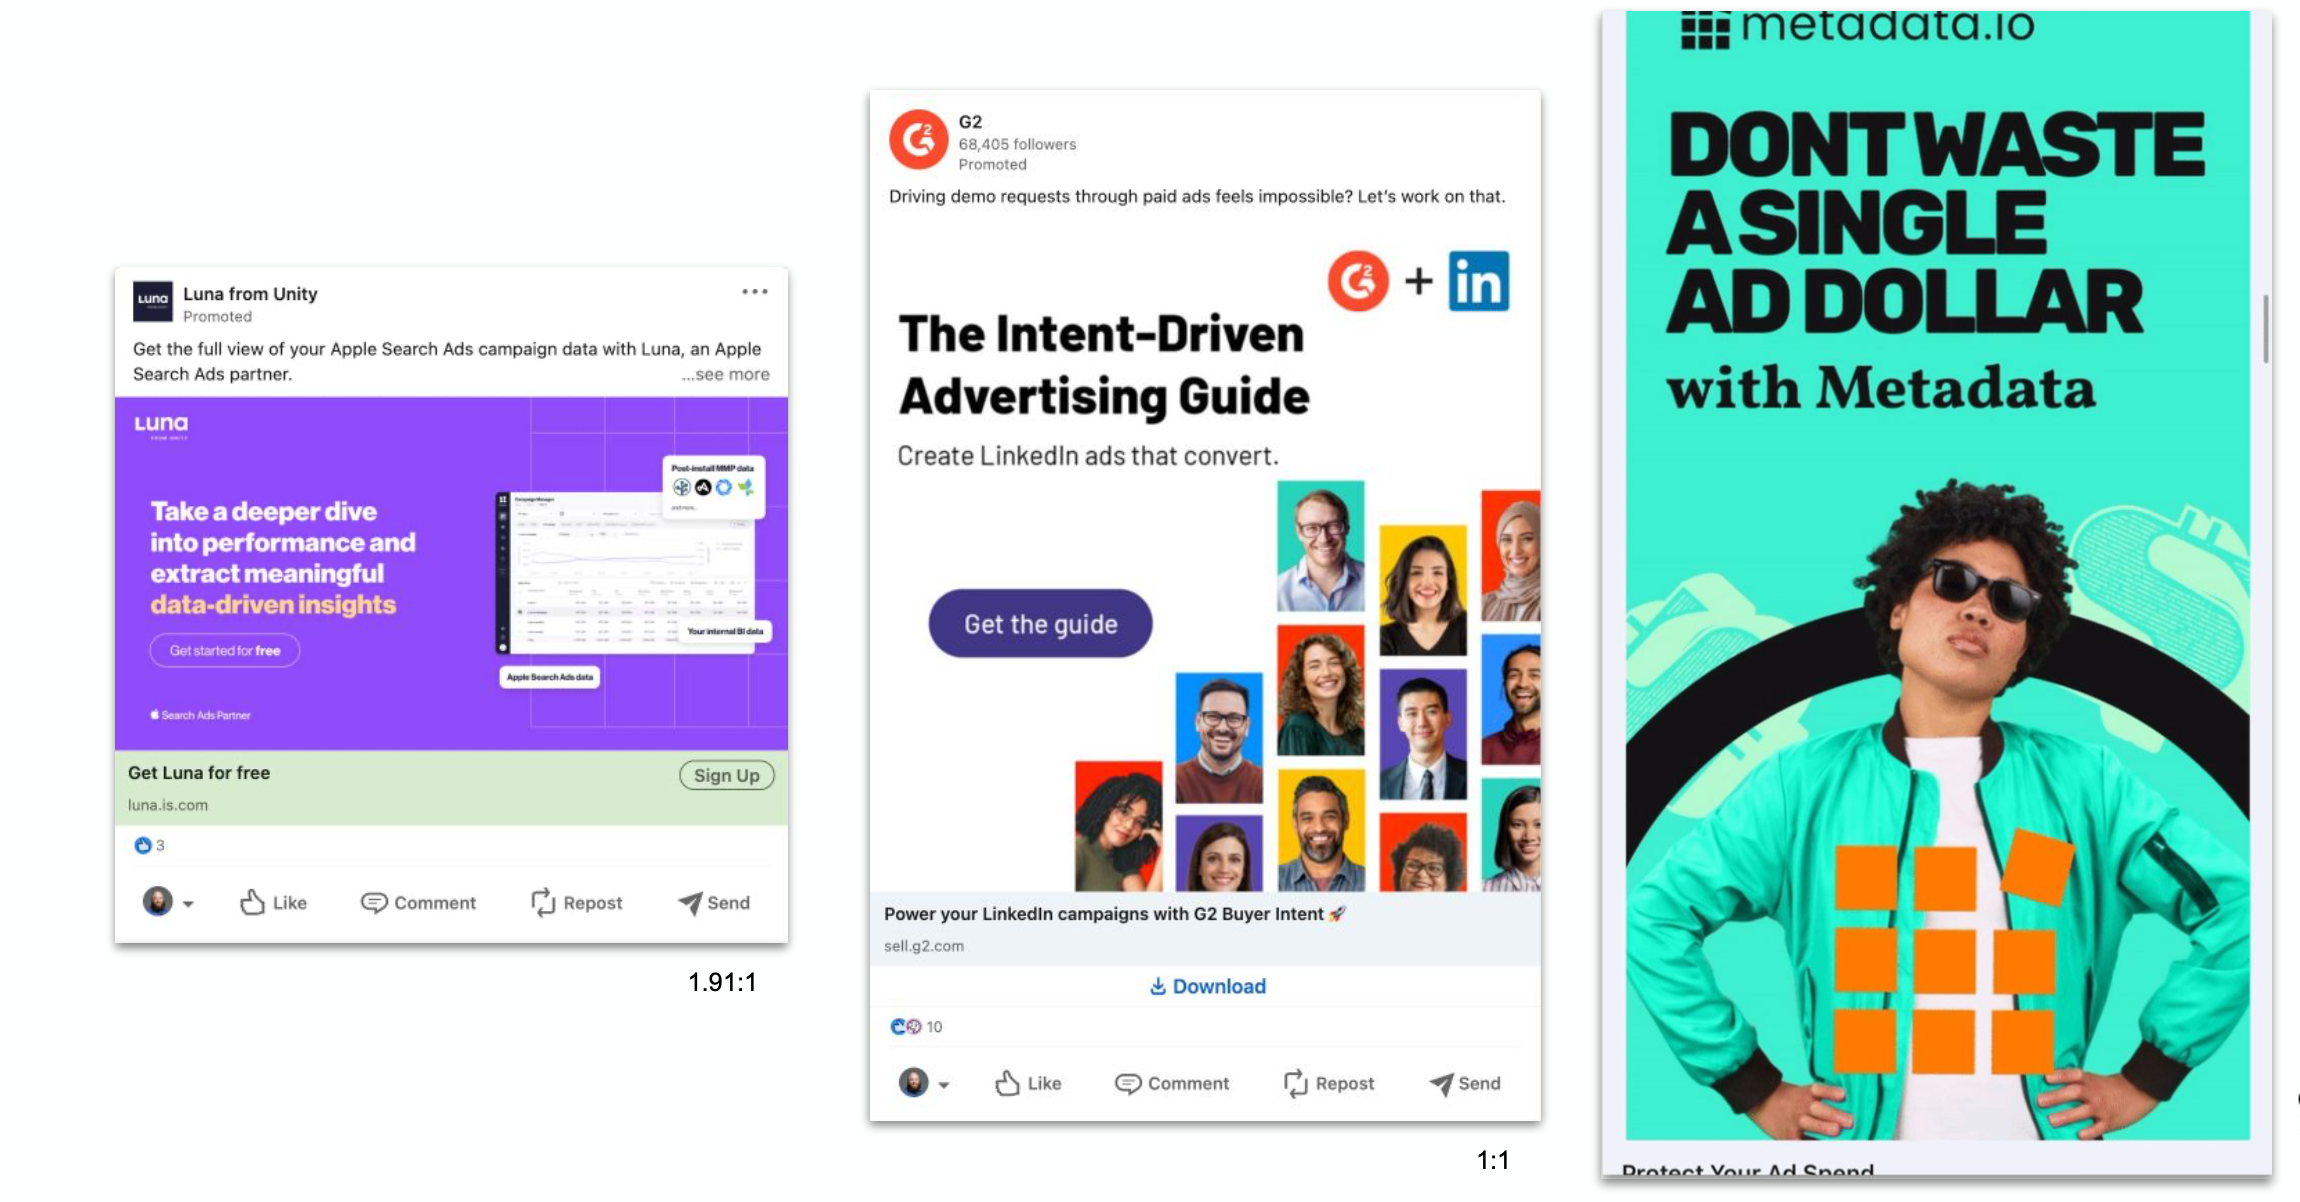 Smarter Ads: 5 Cost-Effective Ways to Get Higher Return on Paid Media